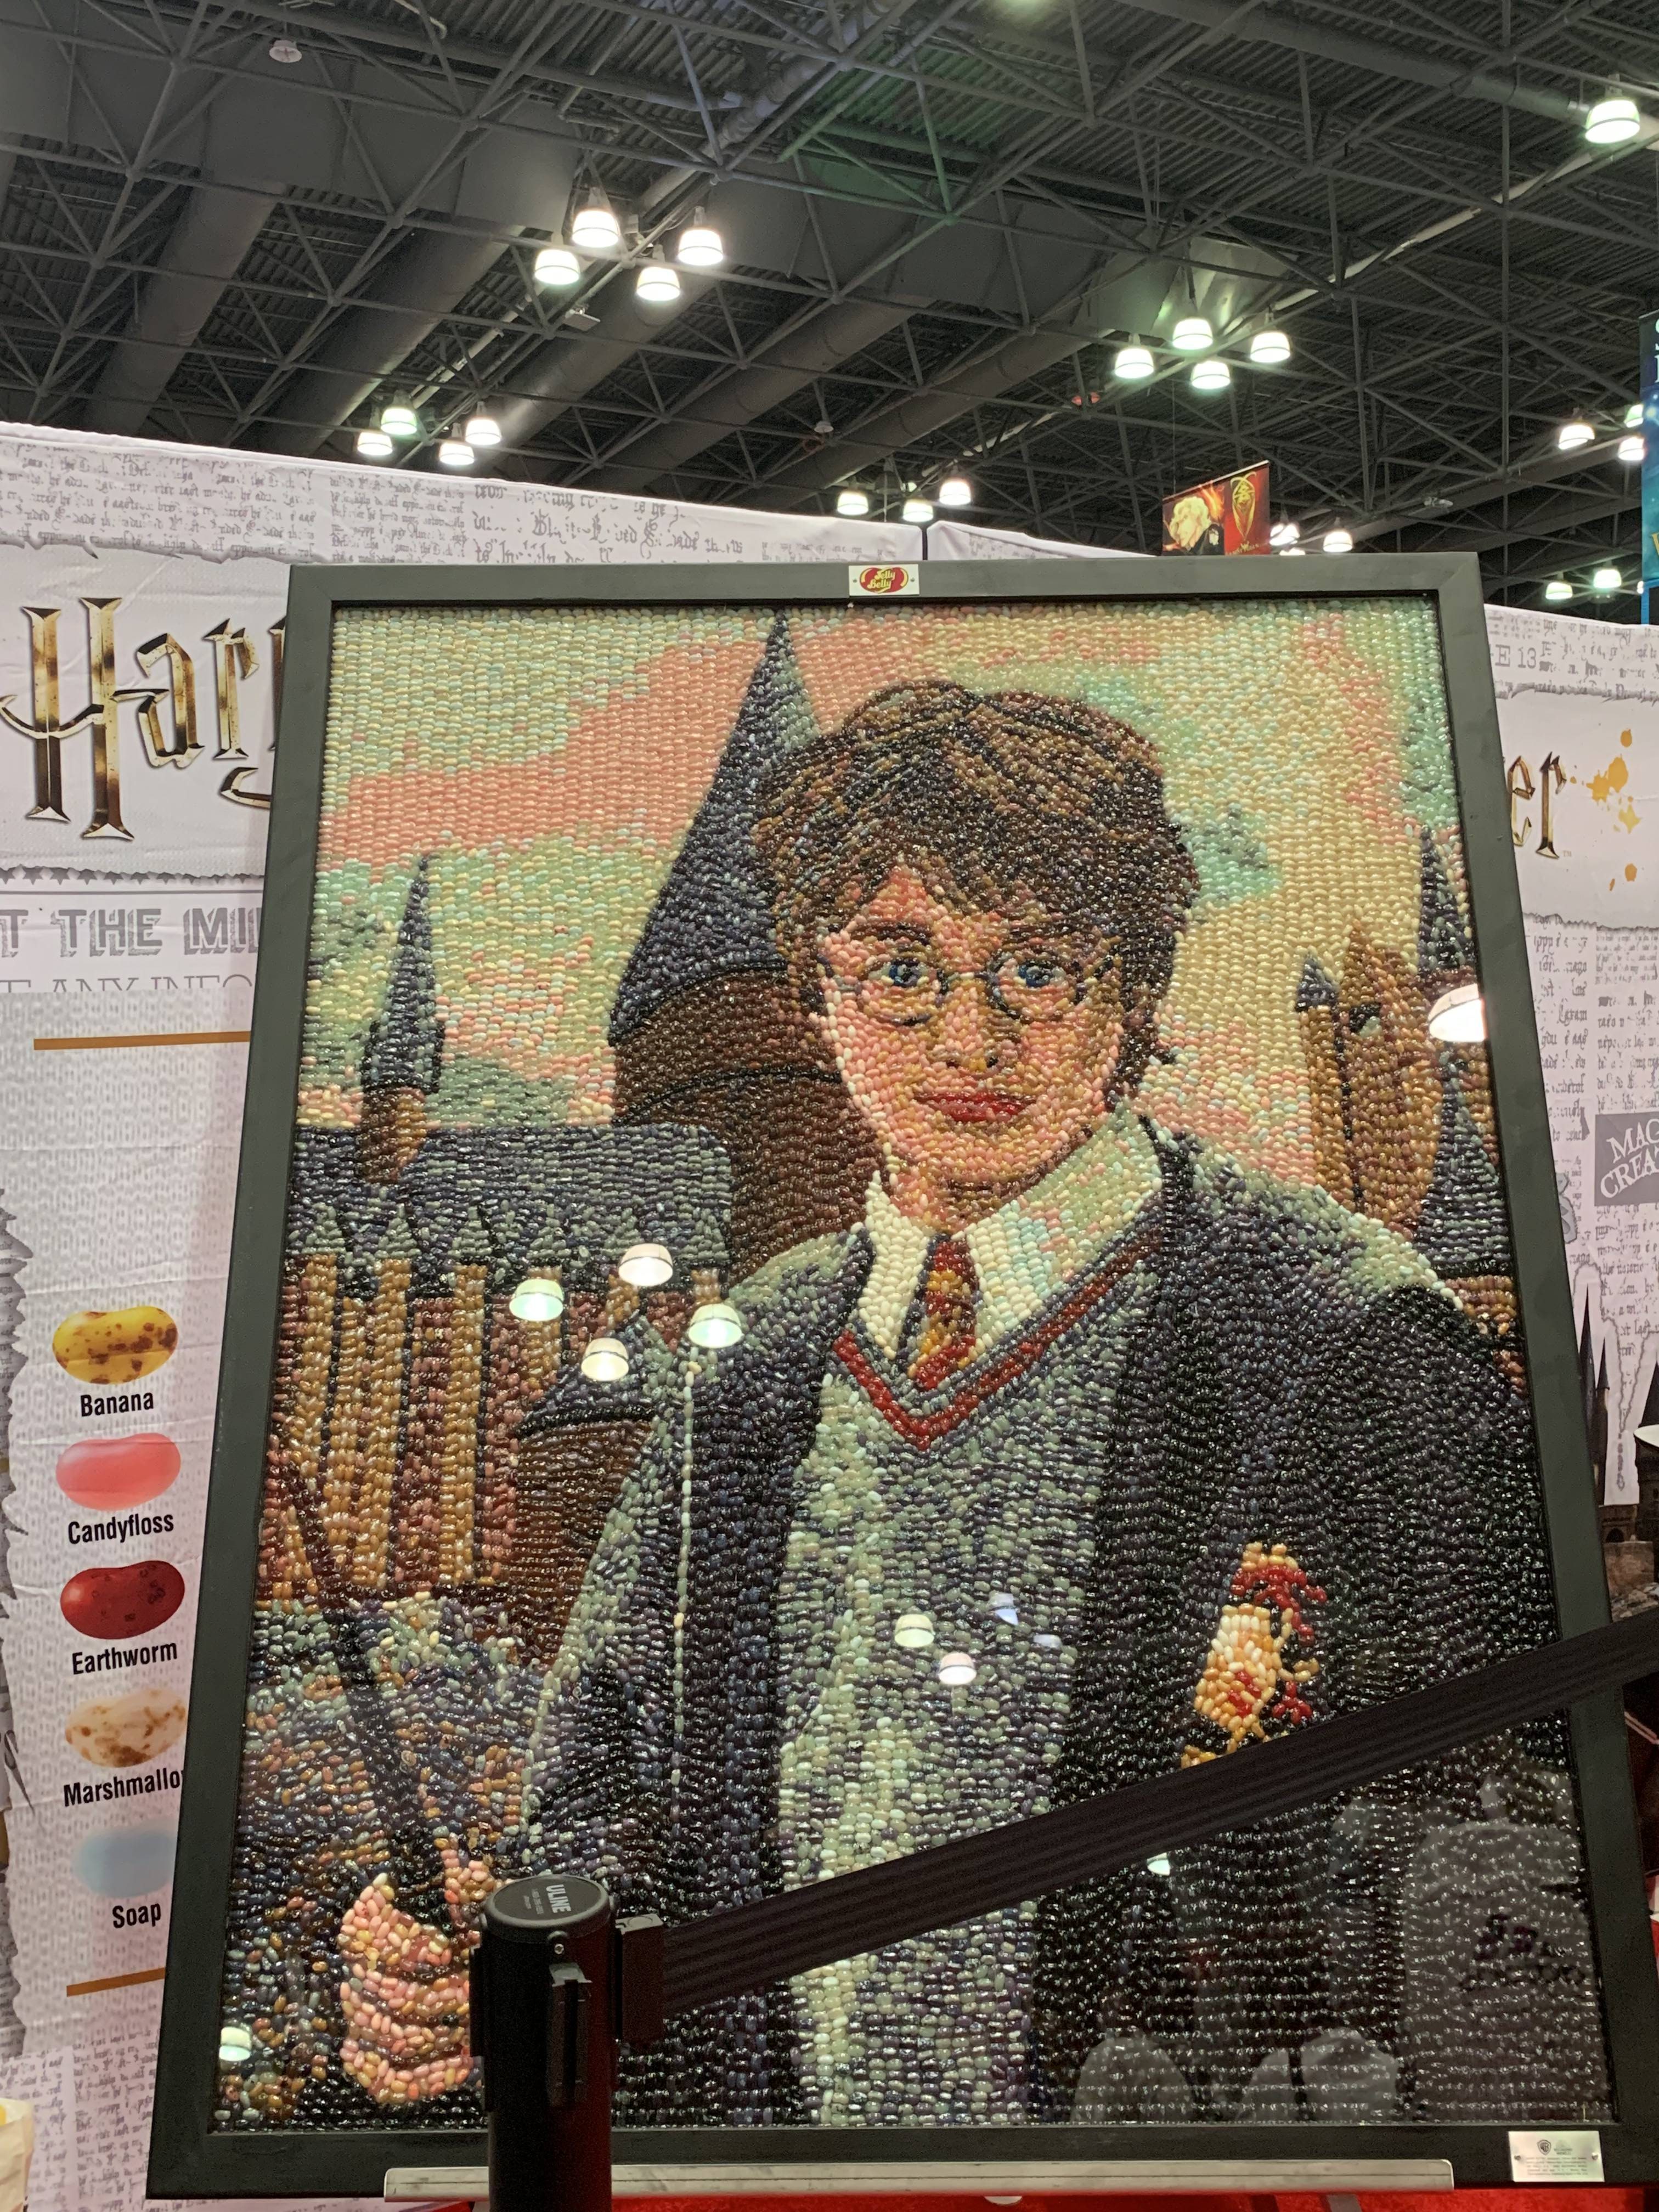 You may remember Kristen Cummings’ portrait of Harry Potter from last year’s NYCC.